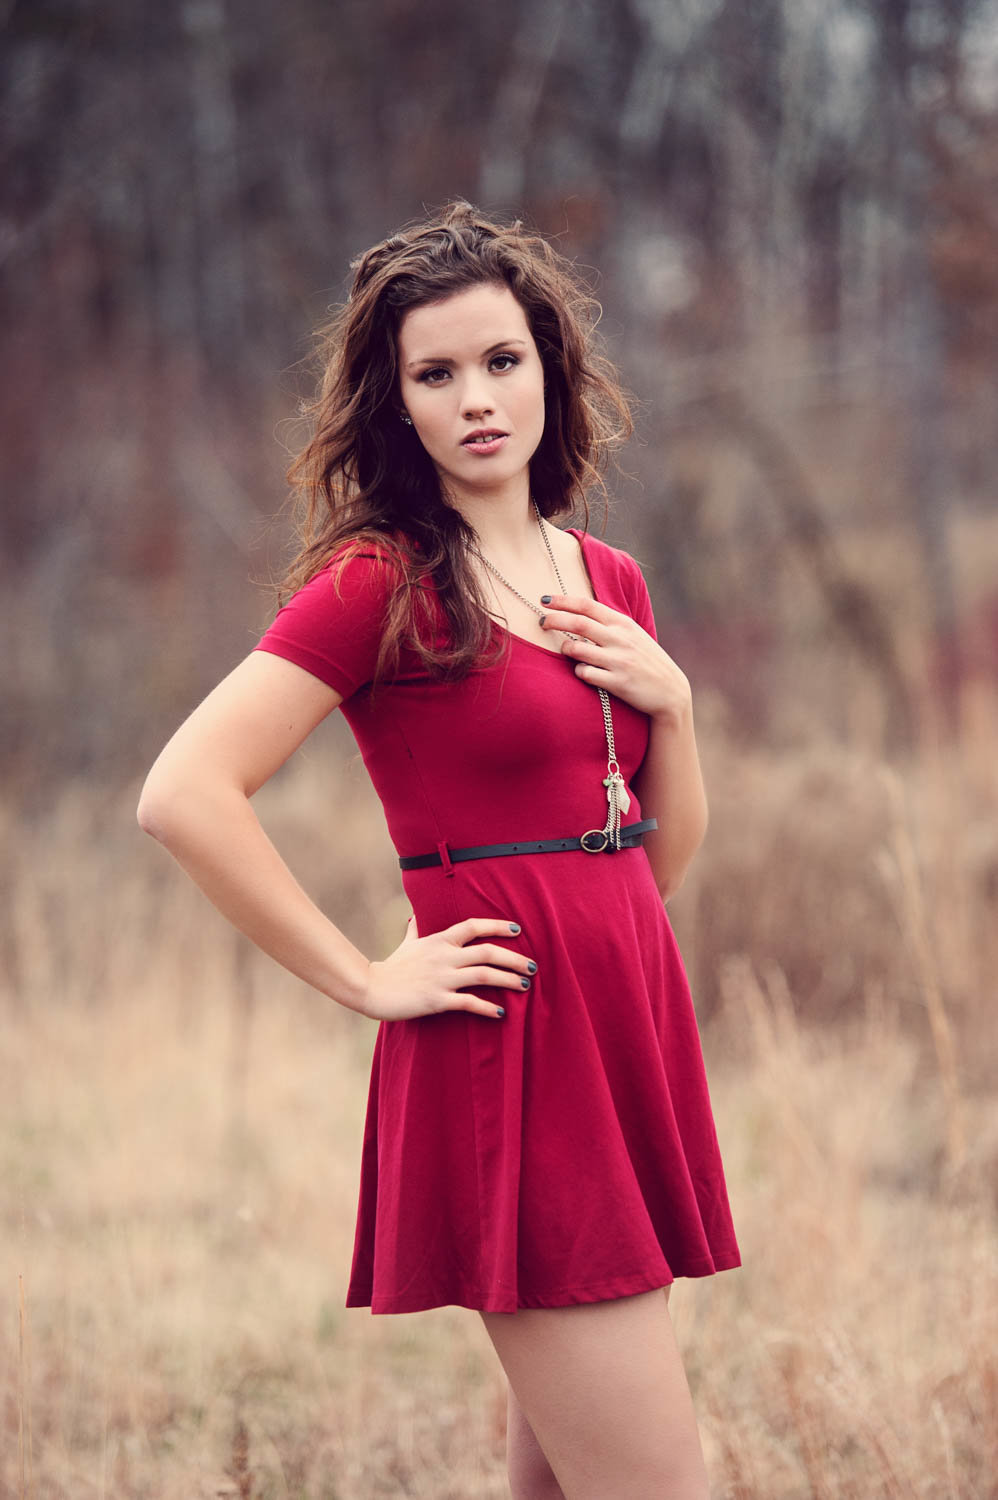 high school senior photo in red dress with fall grasses and trees